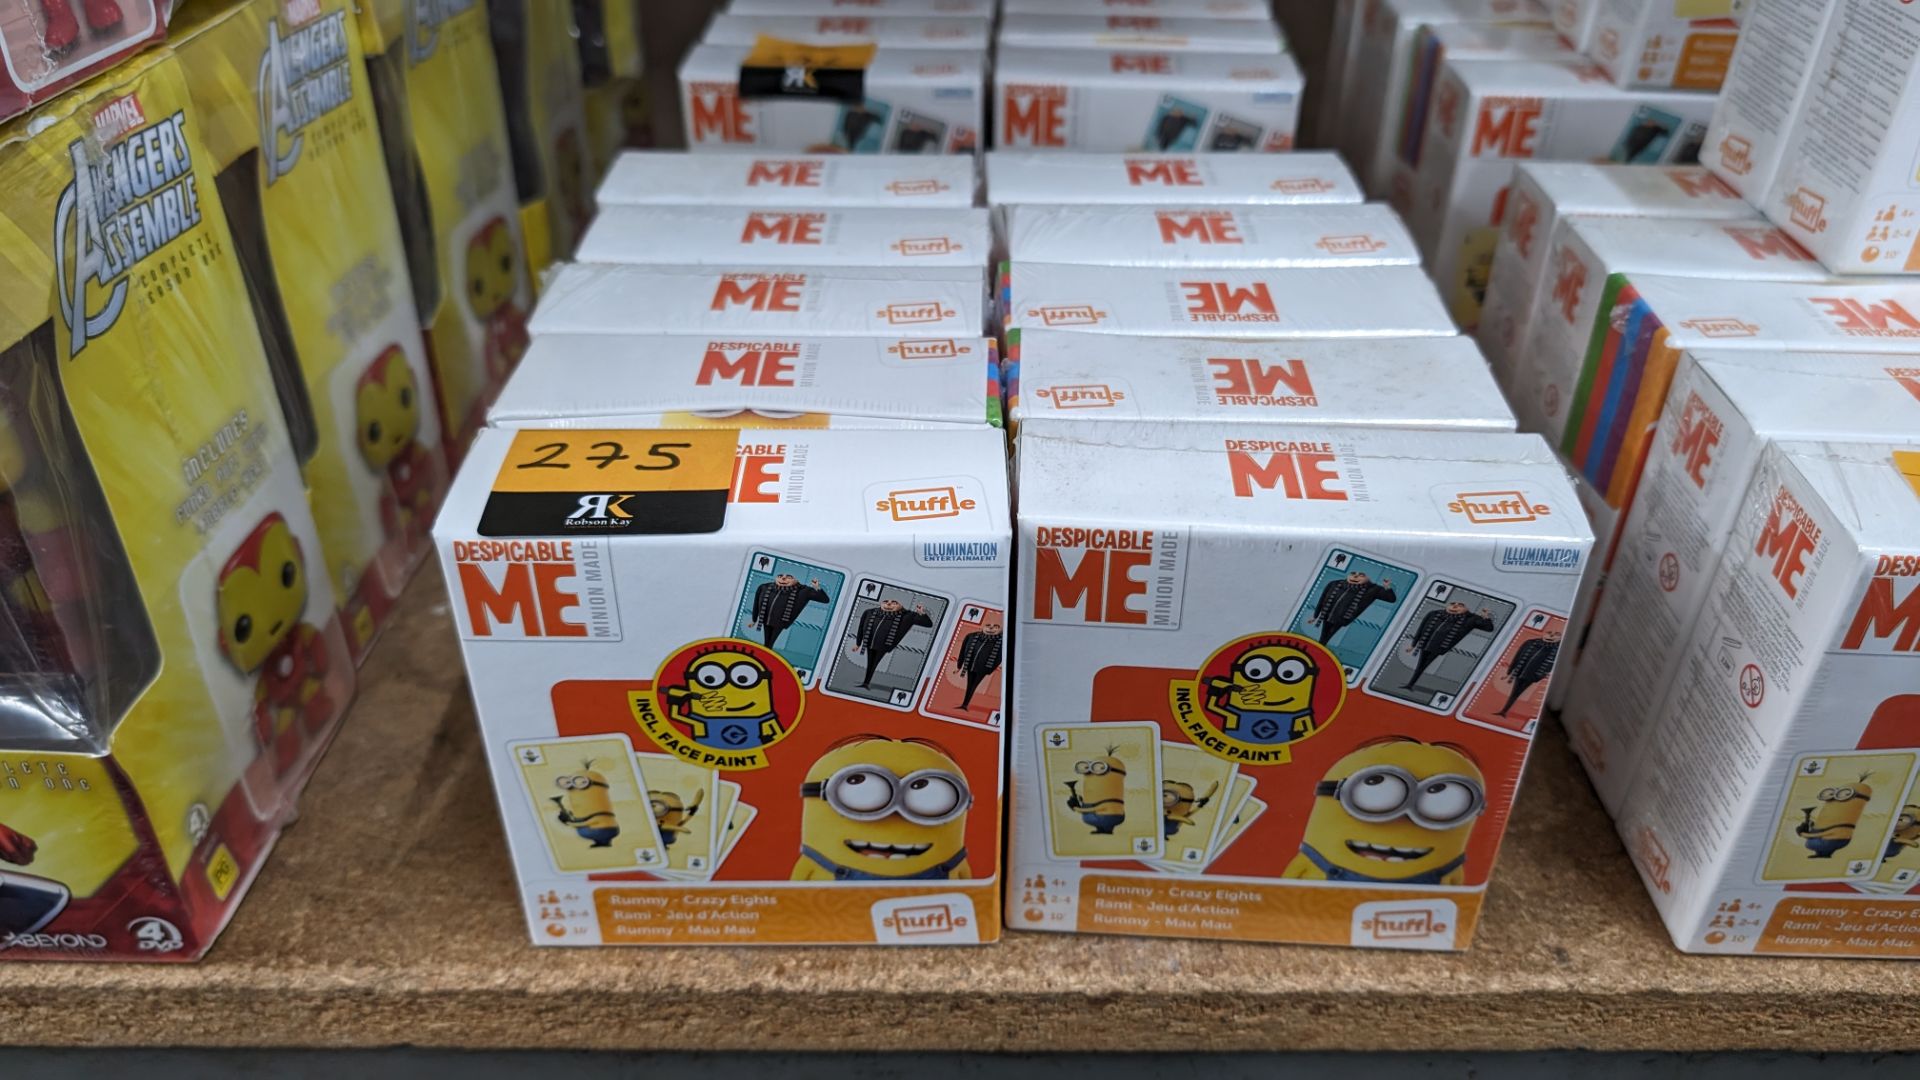 10 off Despicable Me Rummy/Crazy Eights card game gifts, each including face paint marker and rule b - Image 2 of 3